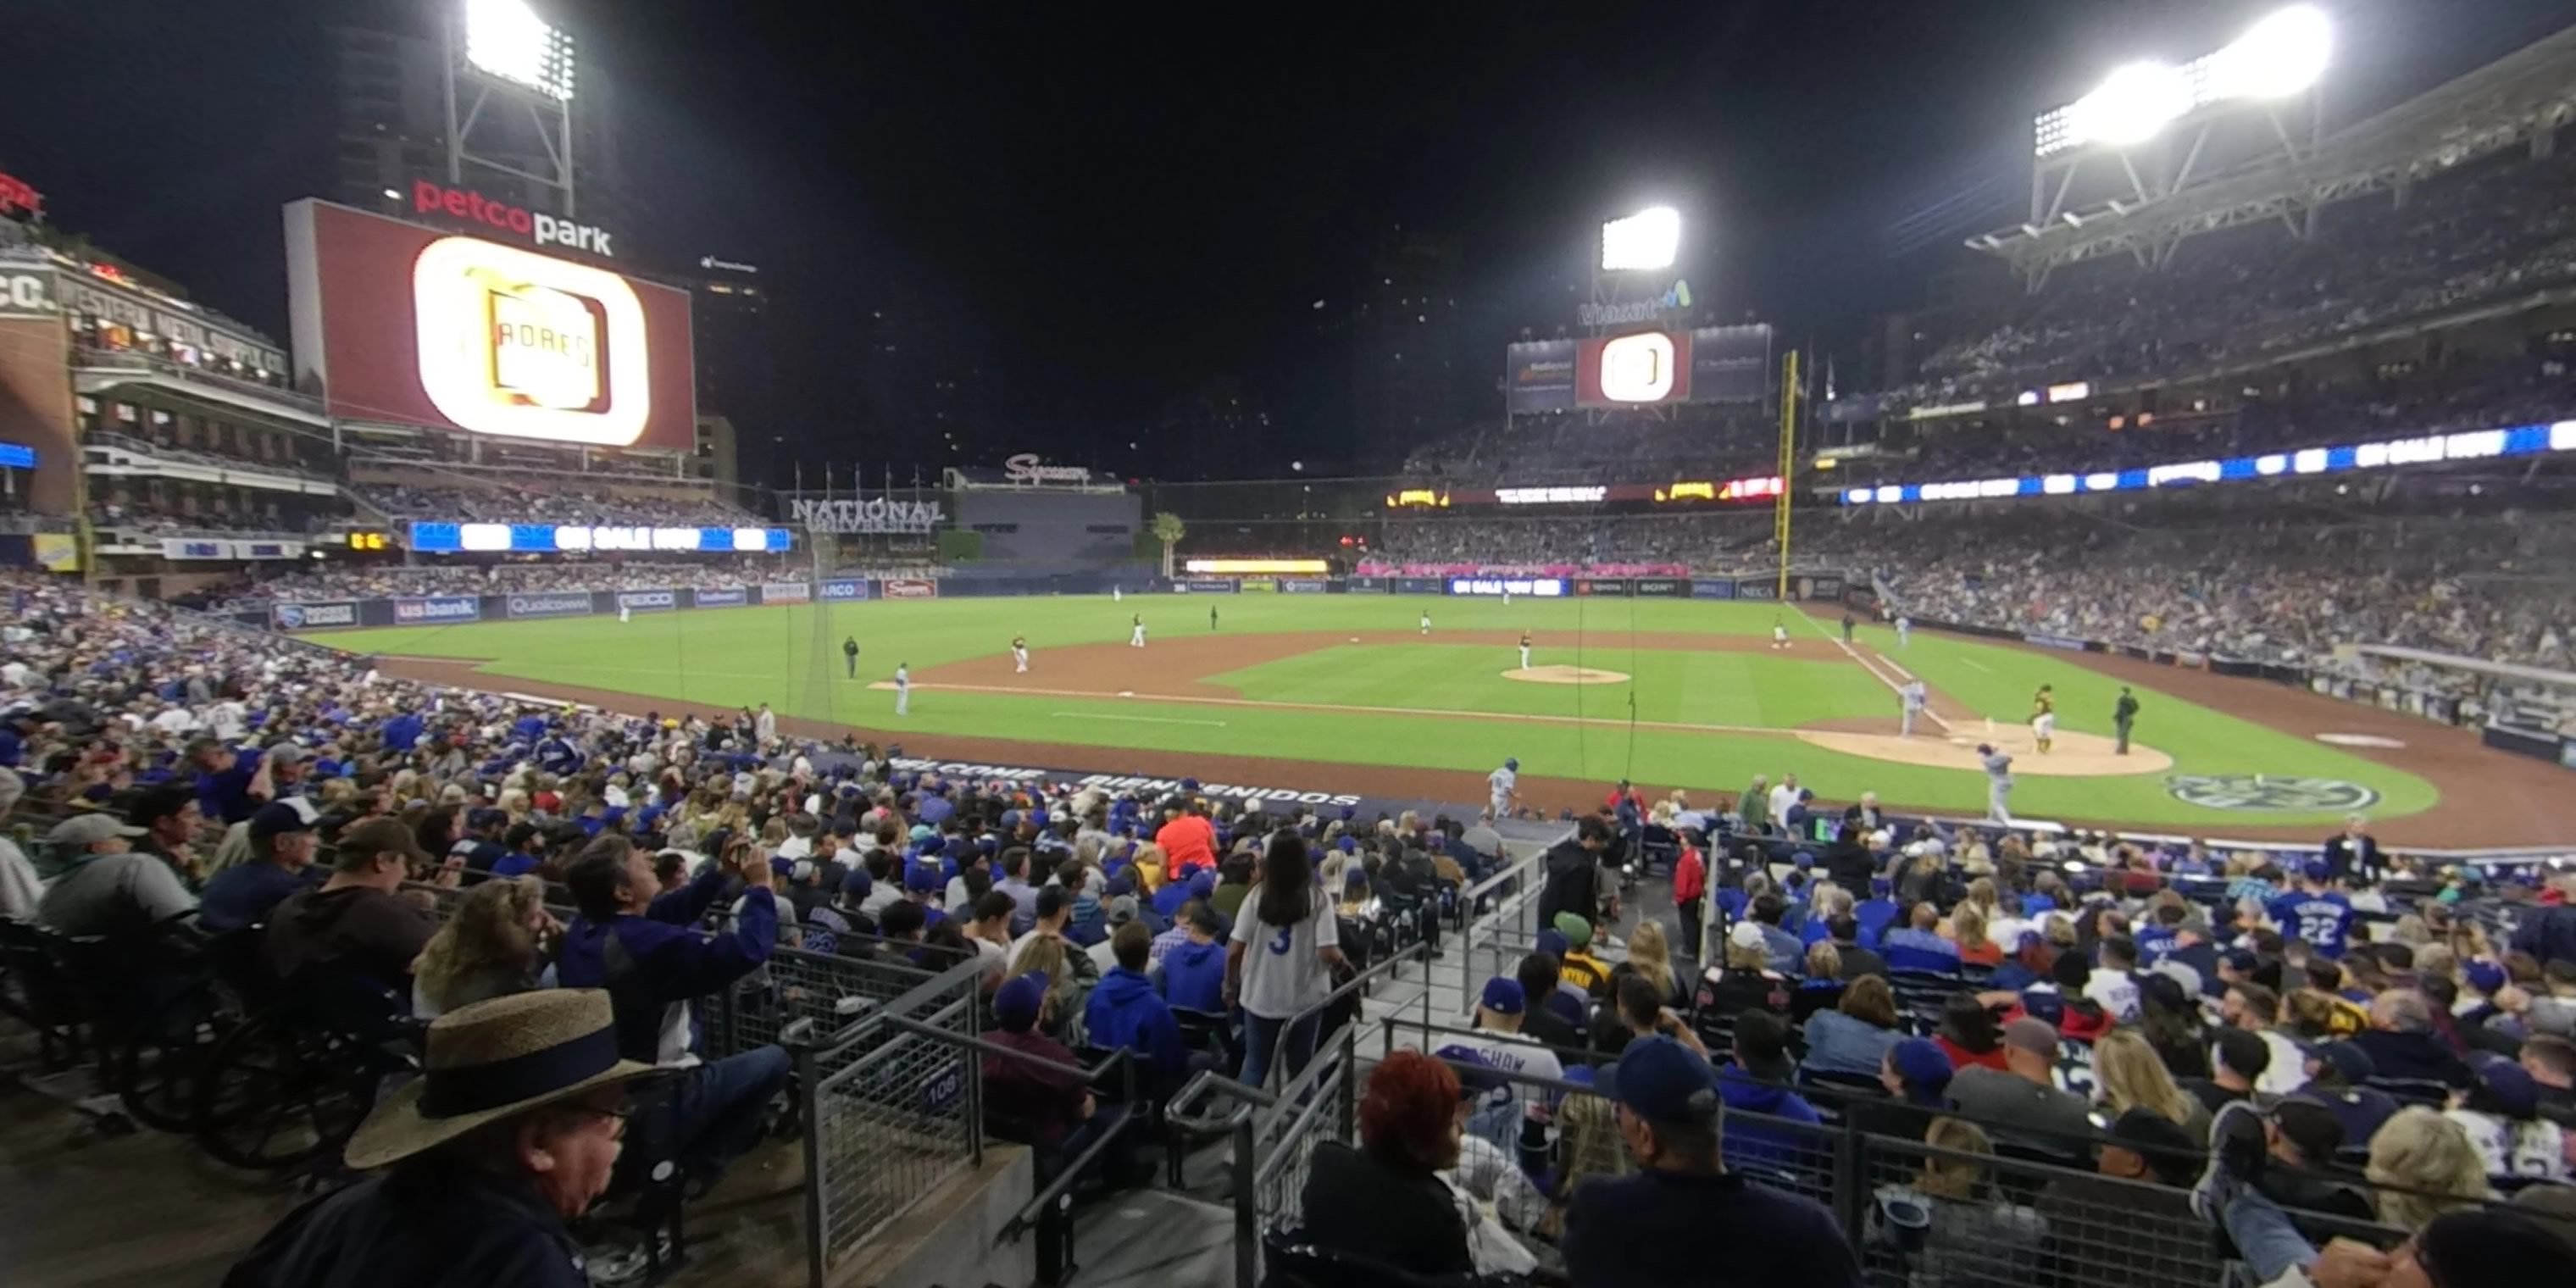 section 106 panoramic seat view  for baseball - petco park